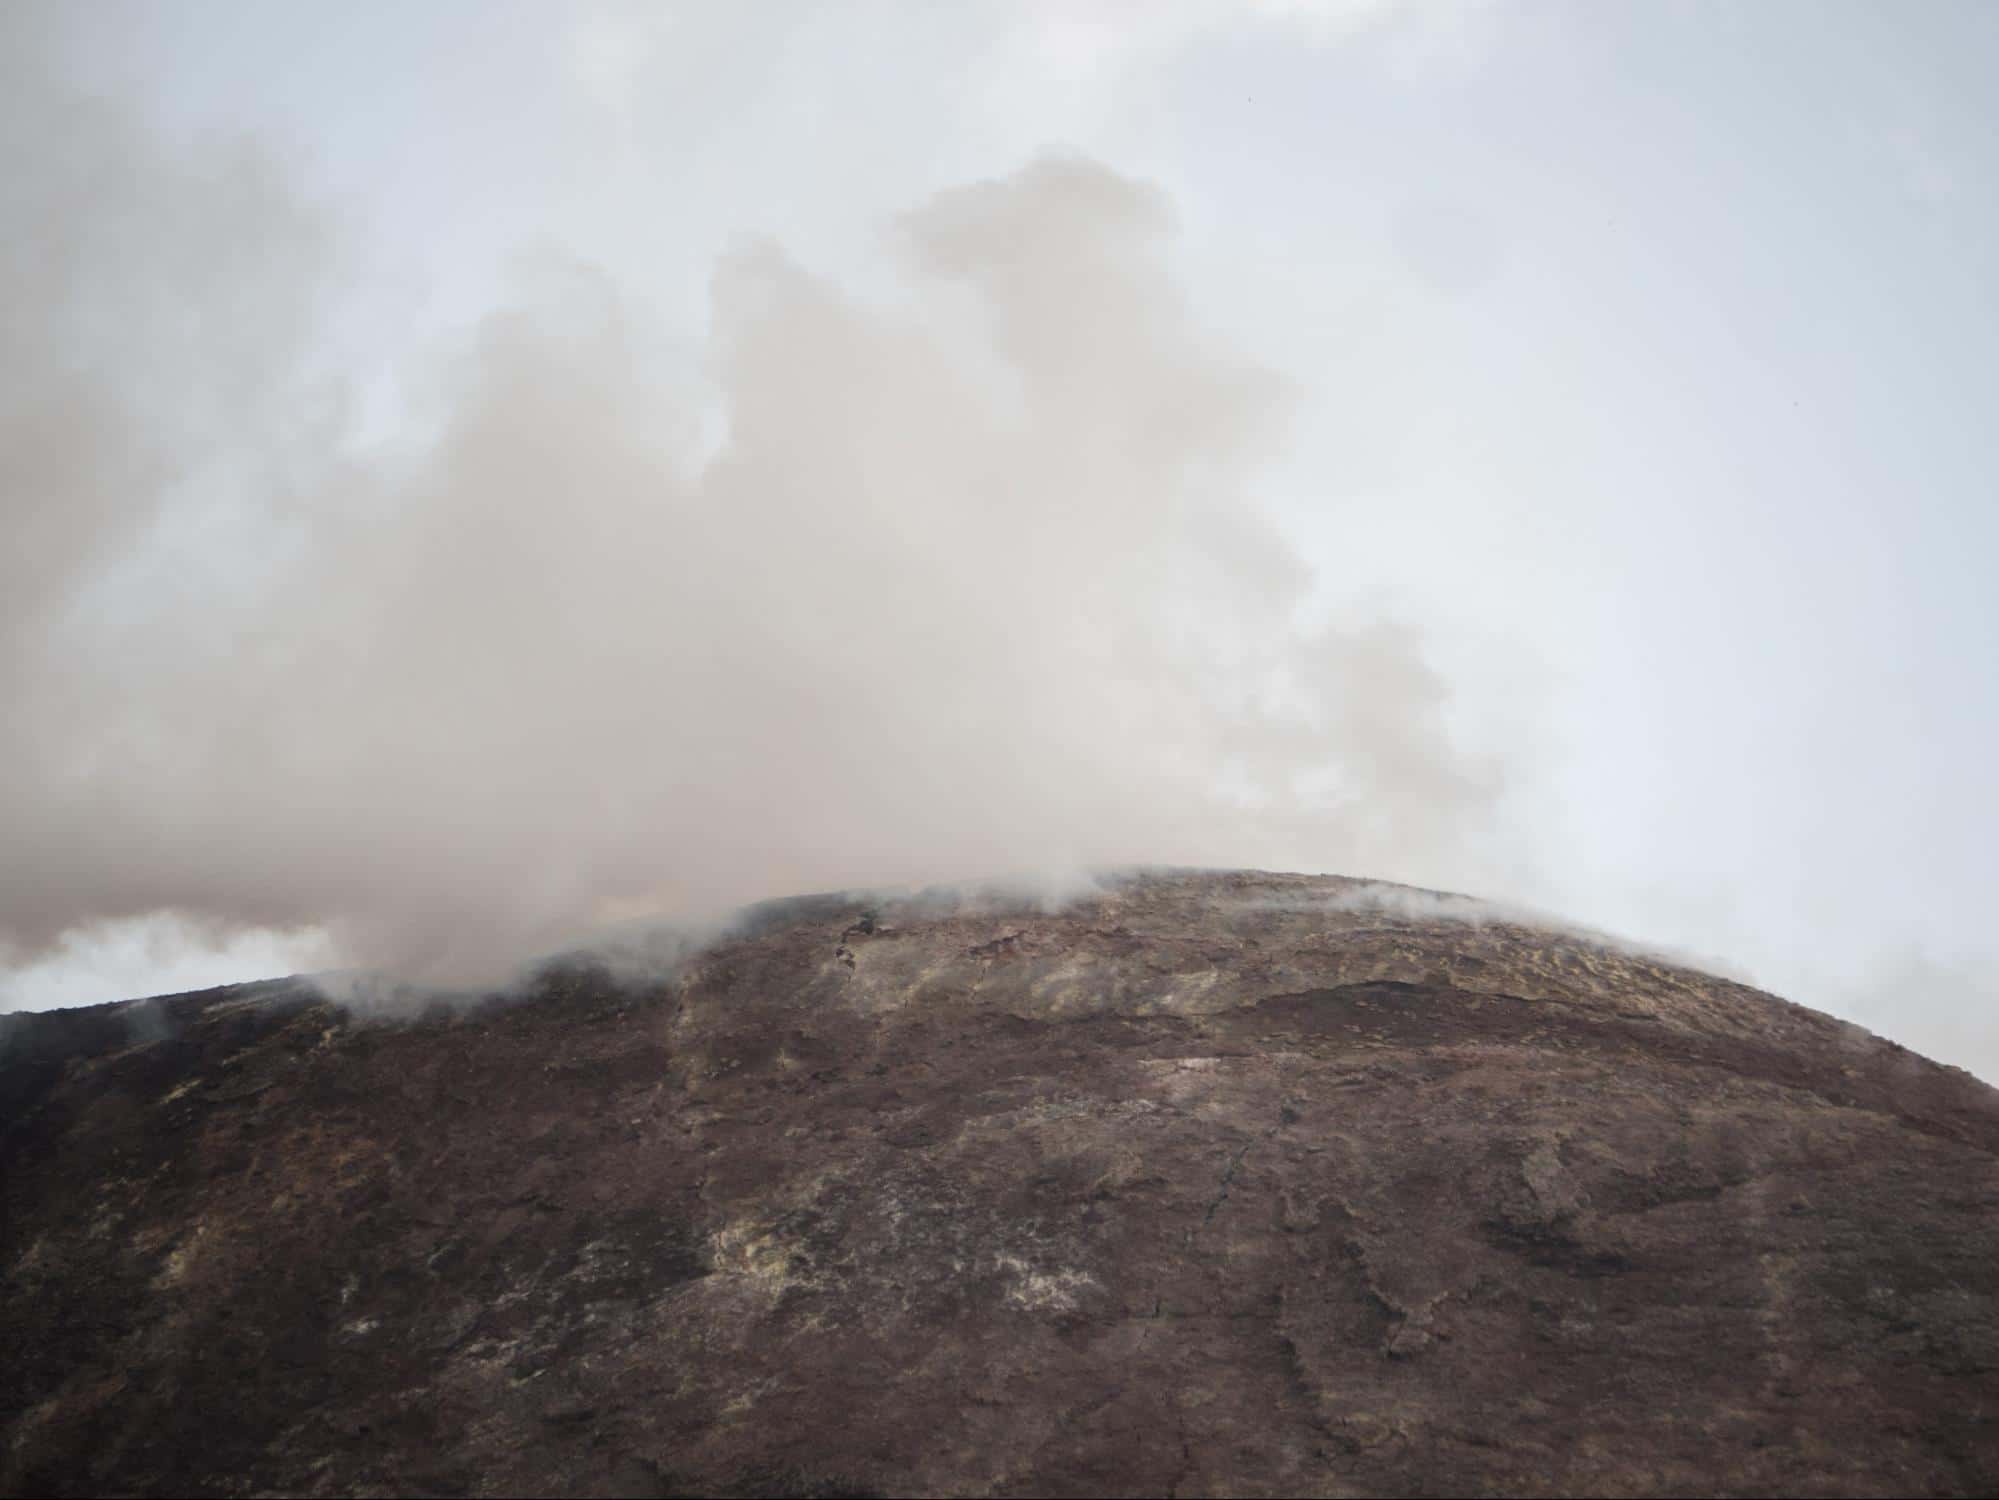 Fumes coming out from Etna’s top crater